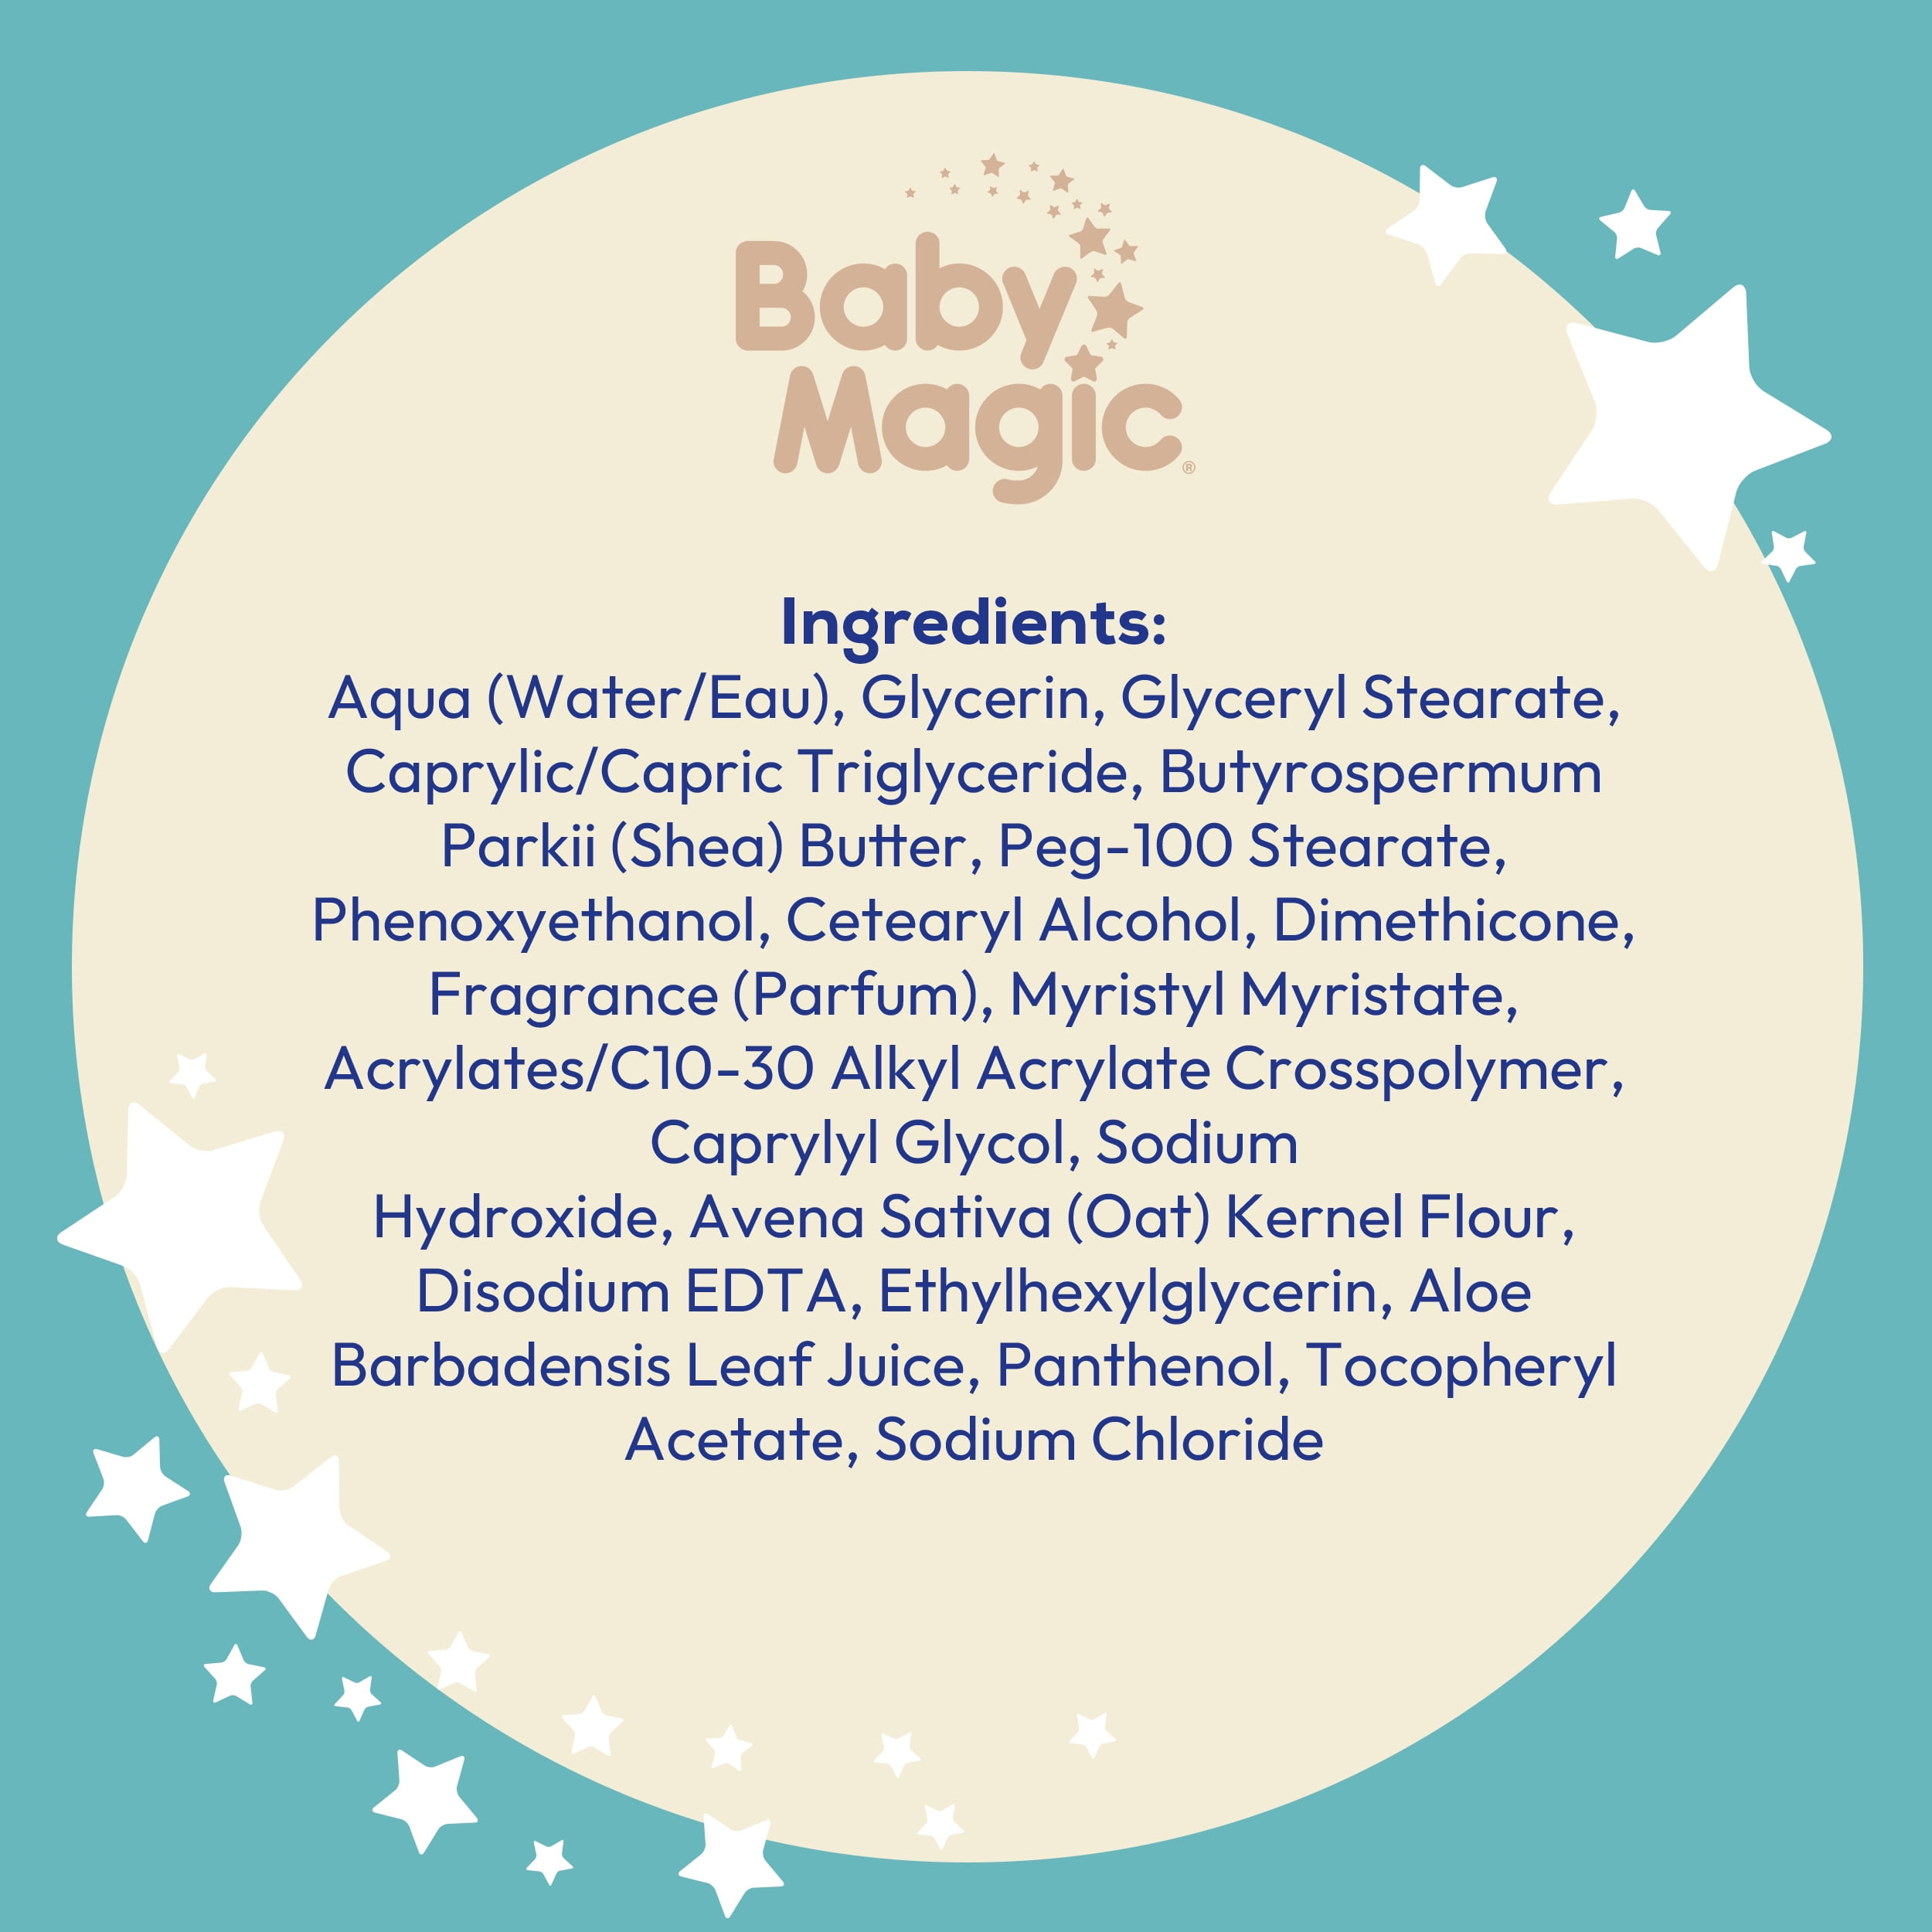 Baby Magic Creamy Whipped Butter Soft Powder Scent, 8.4 oz